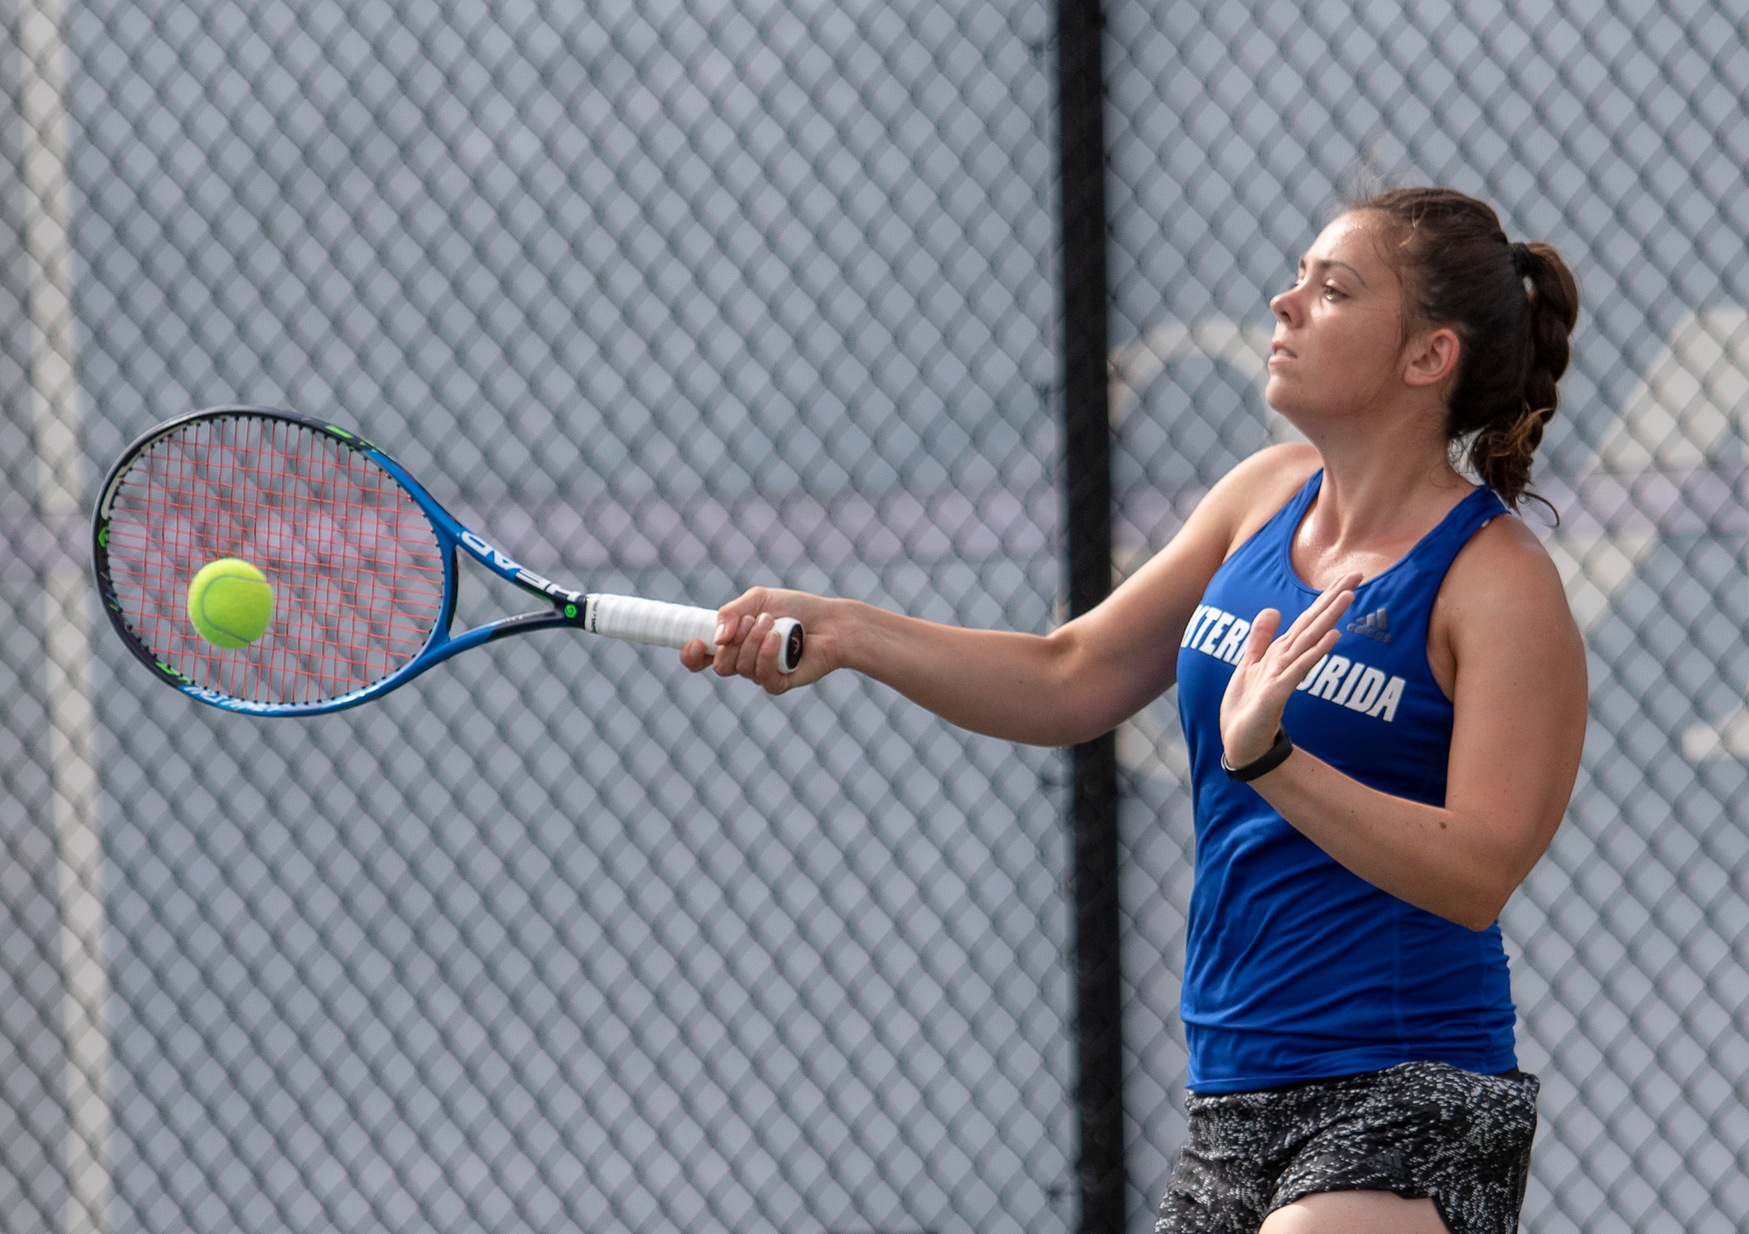 Three women's tennis players play for titles Sunday at Rollins College